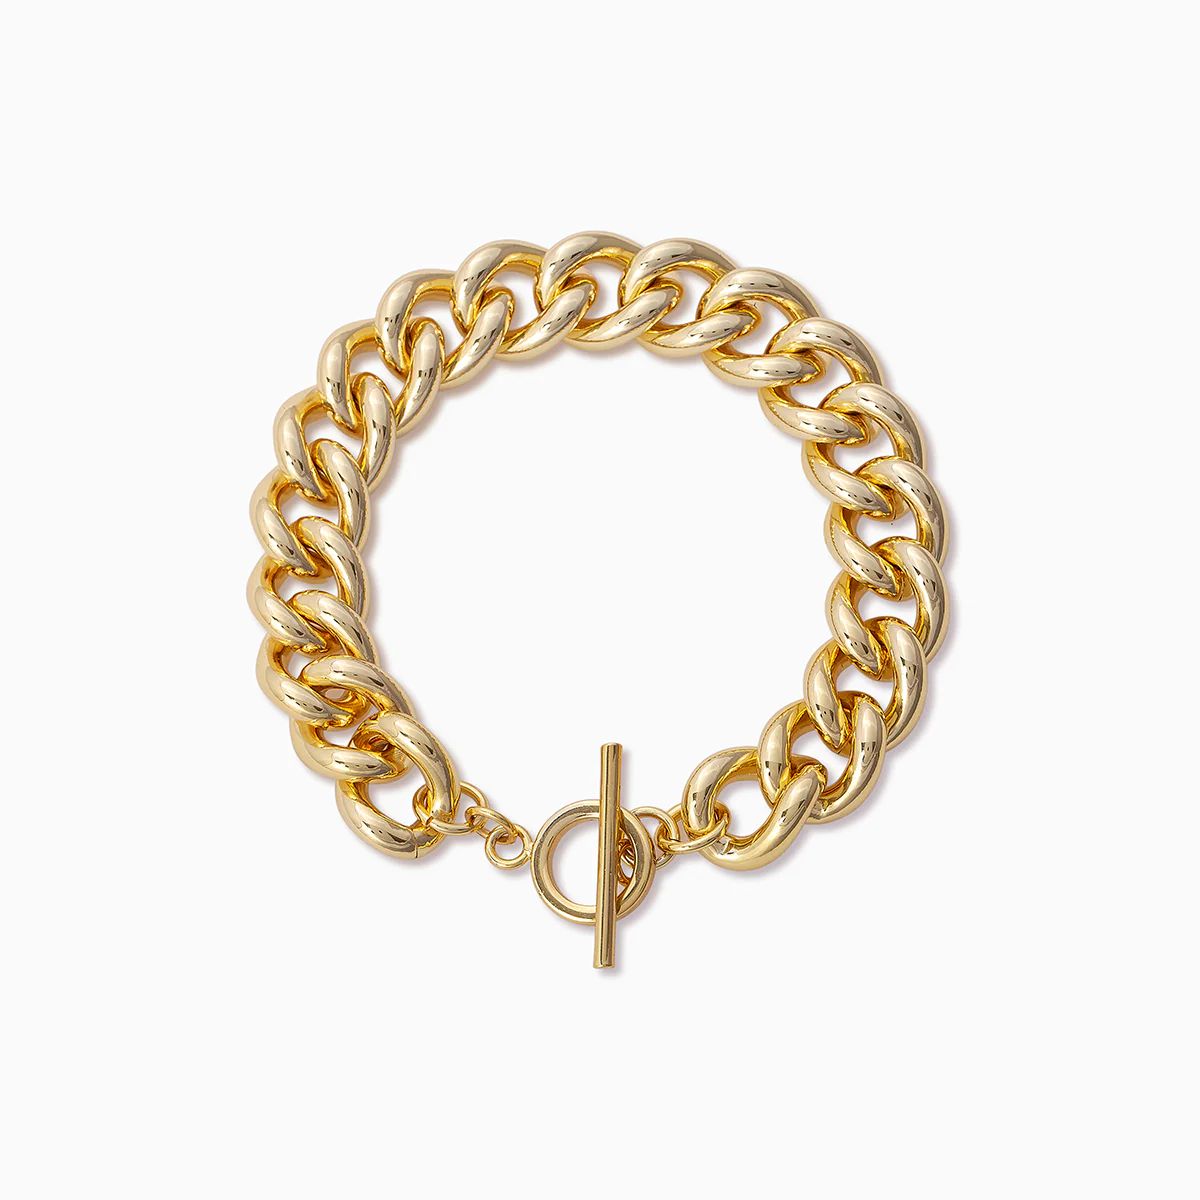 Chain and Toggle Bracelet | Uncommon James